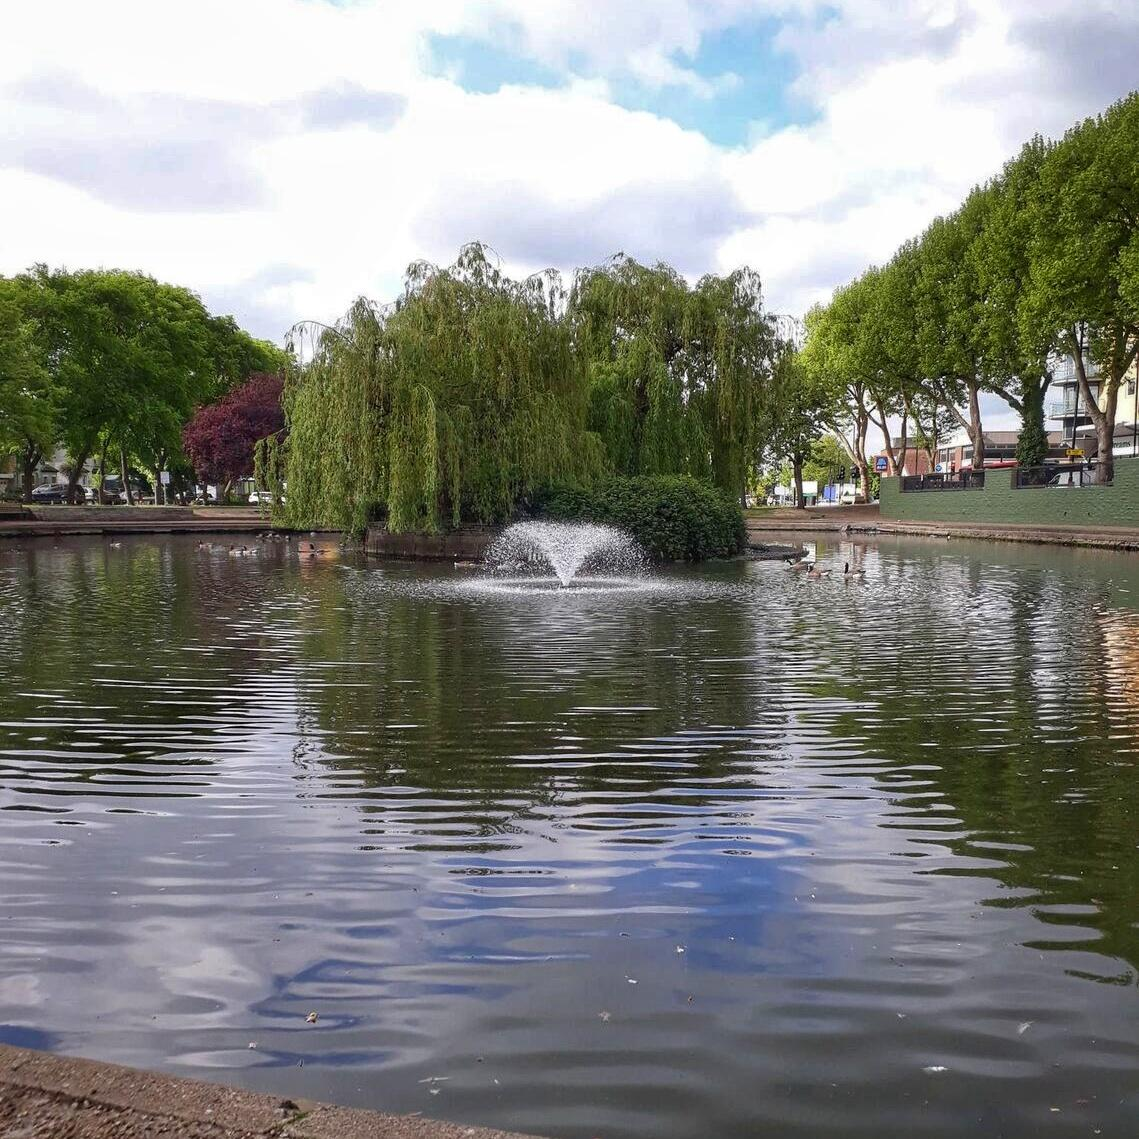 Feltham Pond and Fountain square